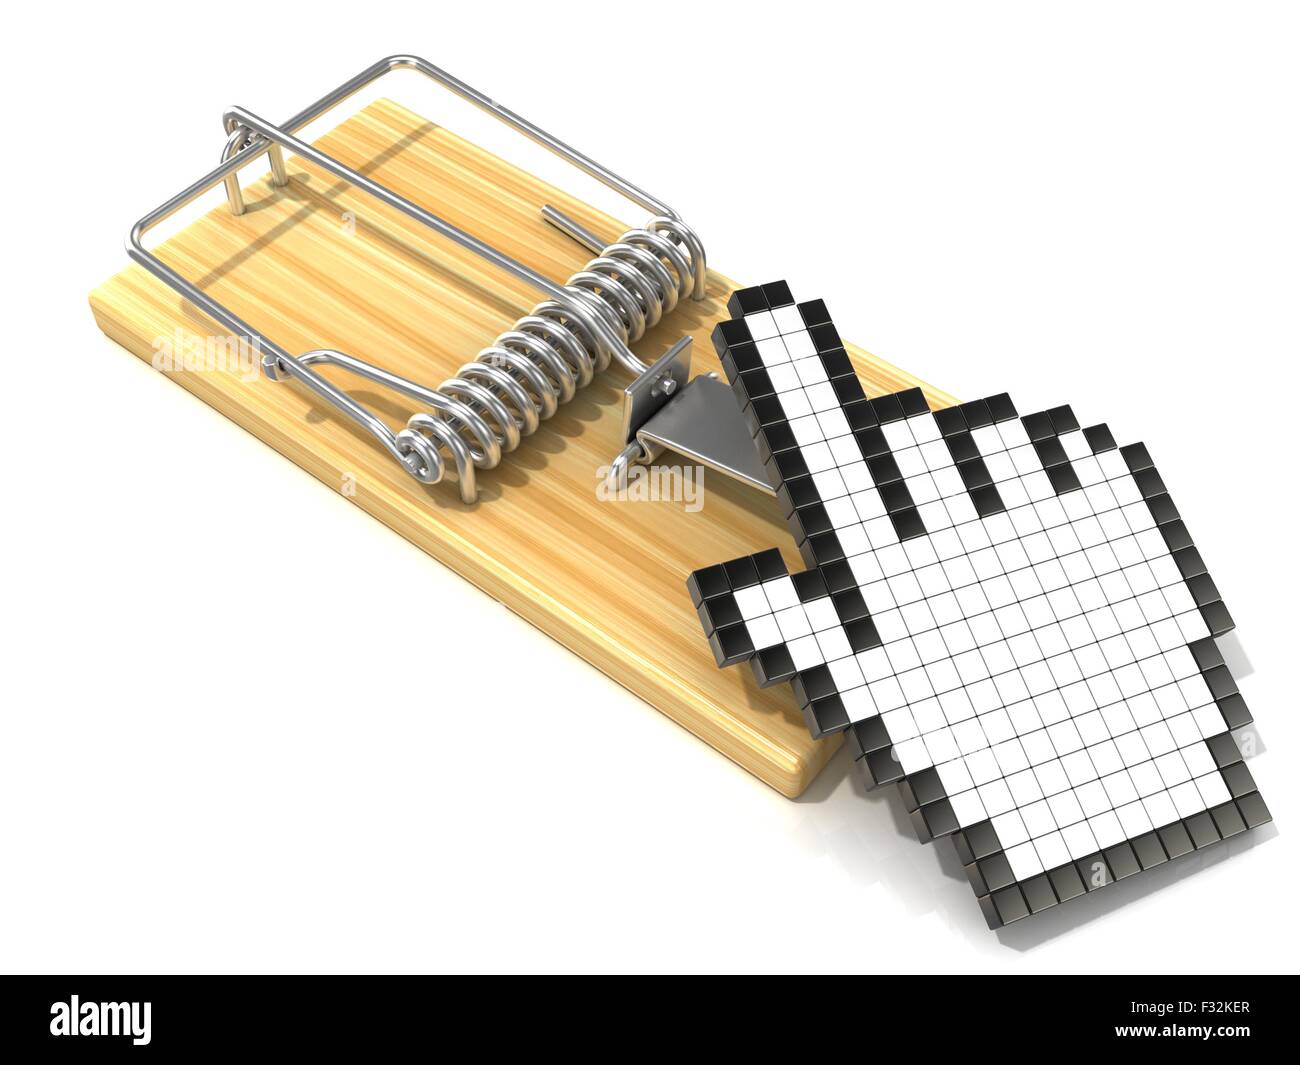 Hand cursor symbol in wooden mousetrap. 3D rendering illustration, isolated on white background. Stock Photo